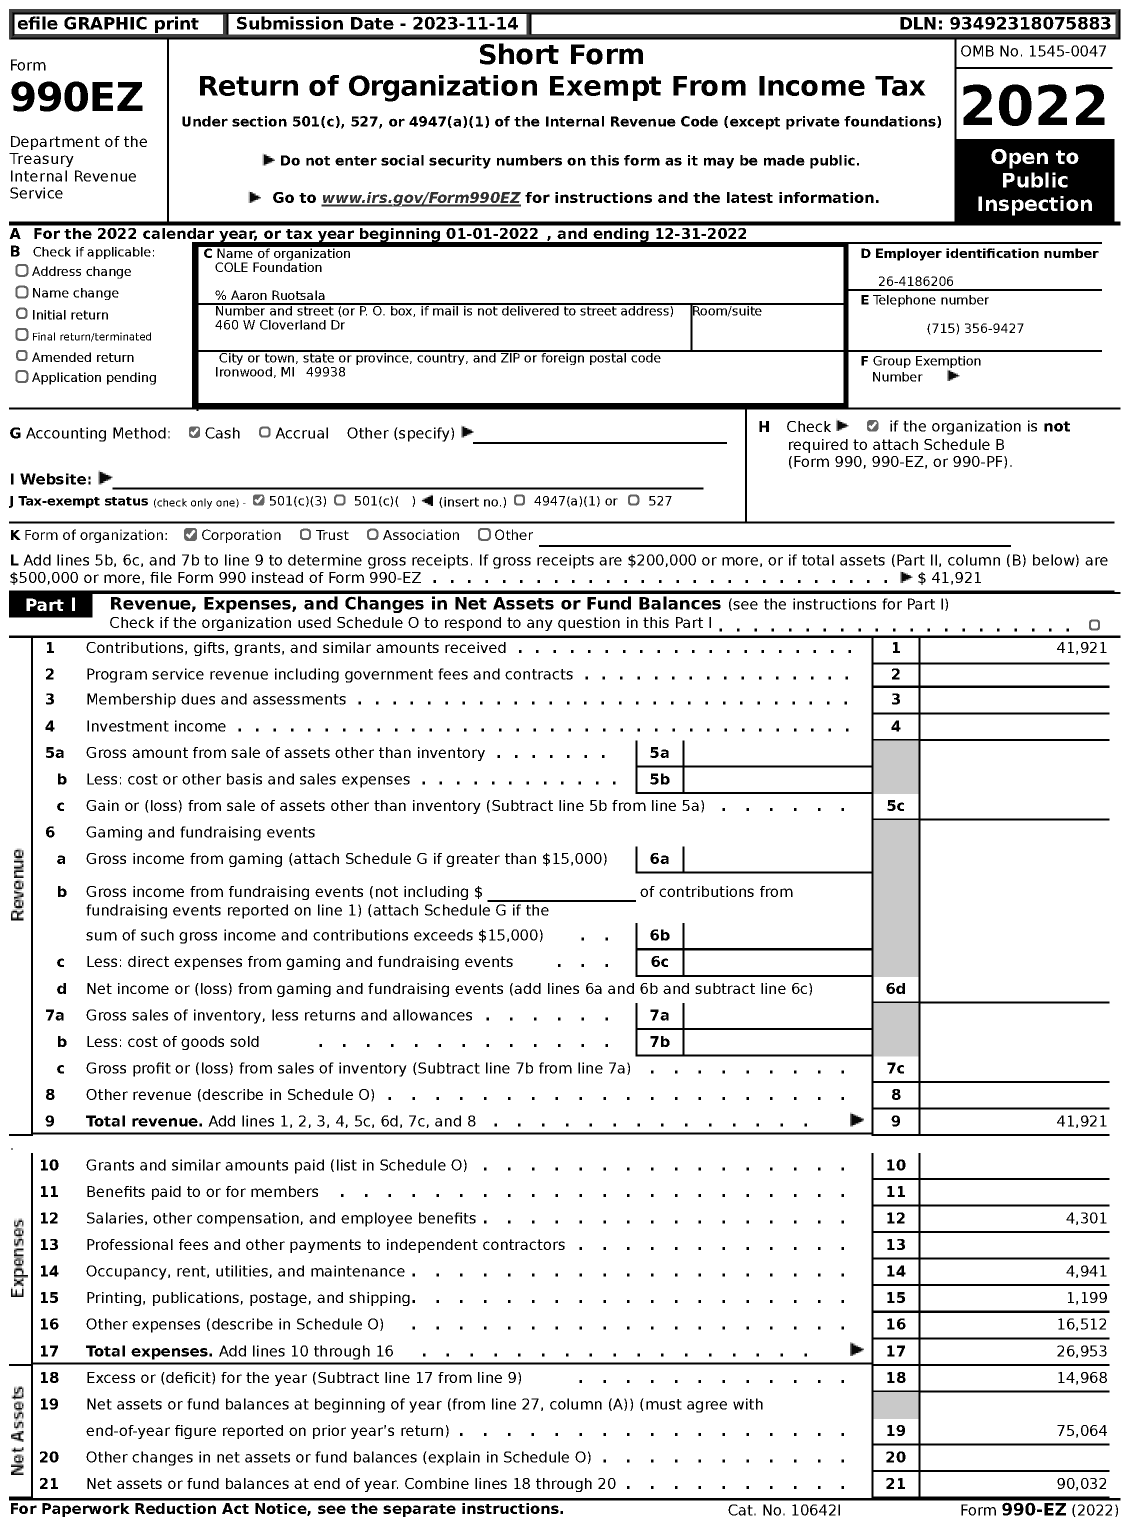 Image of first page of 2022 Form 990EZ for COLE Foundation